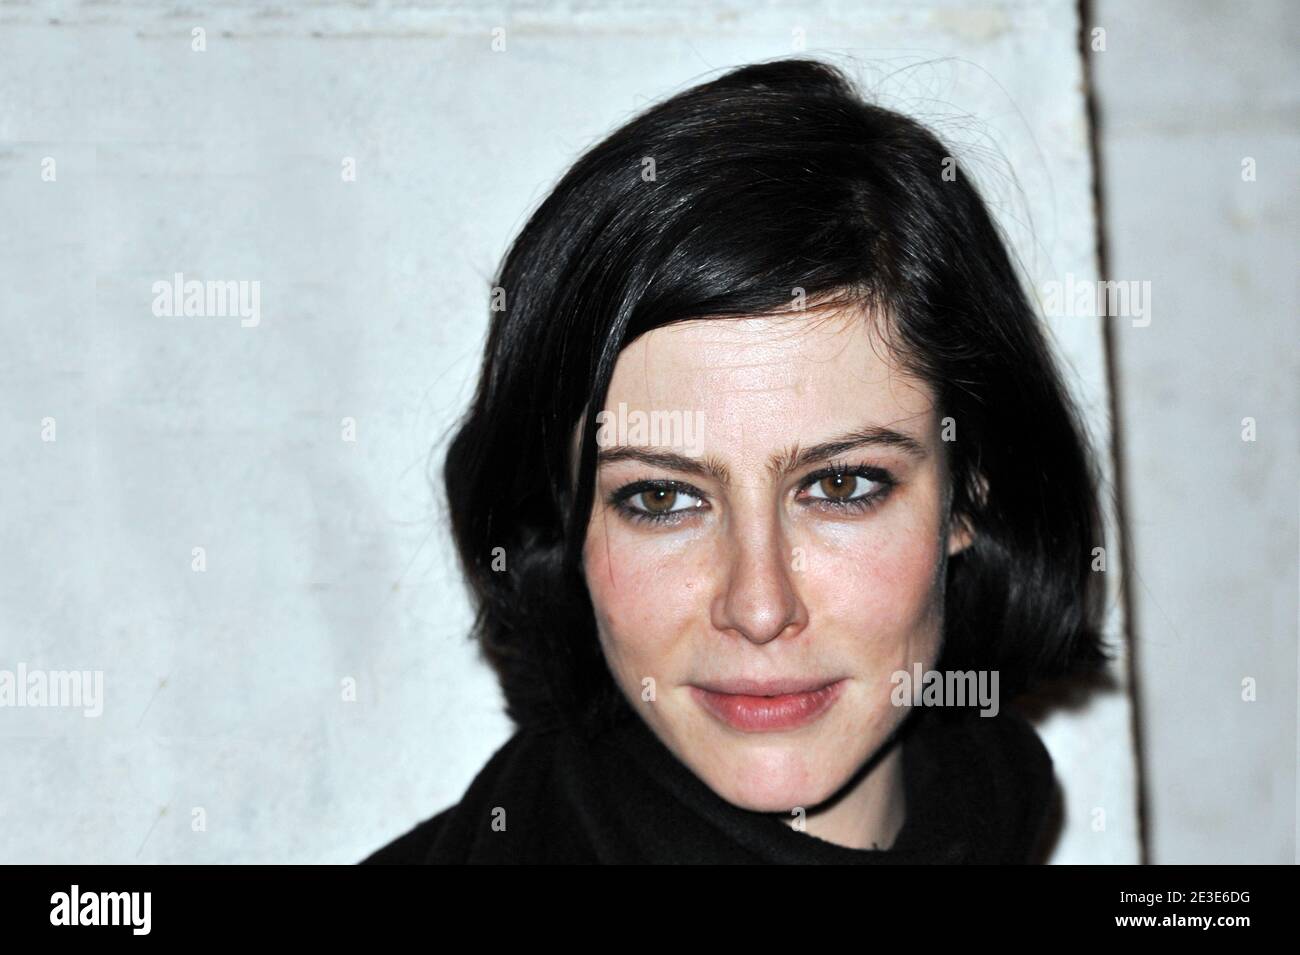 Anna Mouglalis attending the 14th Annual 'Ceremonie Des Lumieres' held at Paris city hall in Paris, France on January 19, 2009. Photo by Thierry Orban/ABACAPRESS.COM Stock Photo